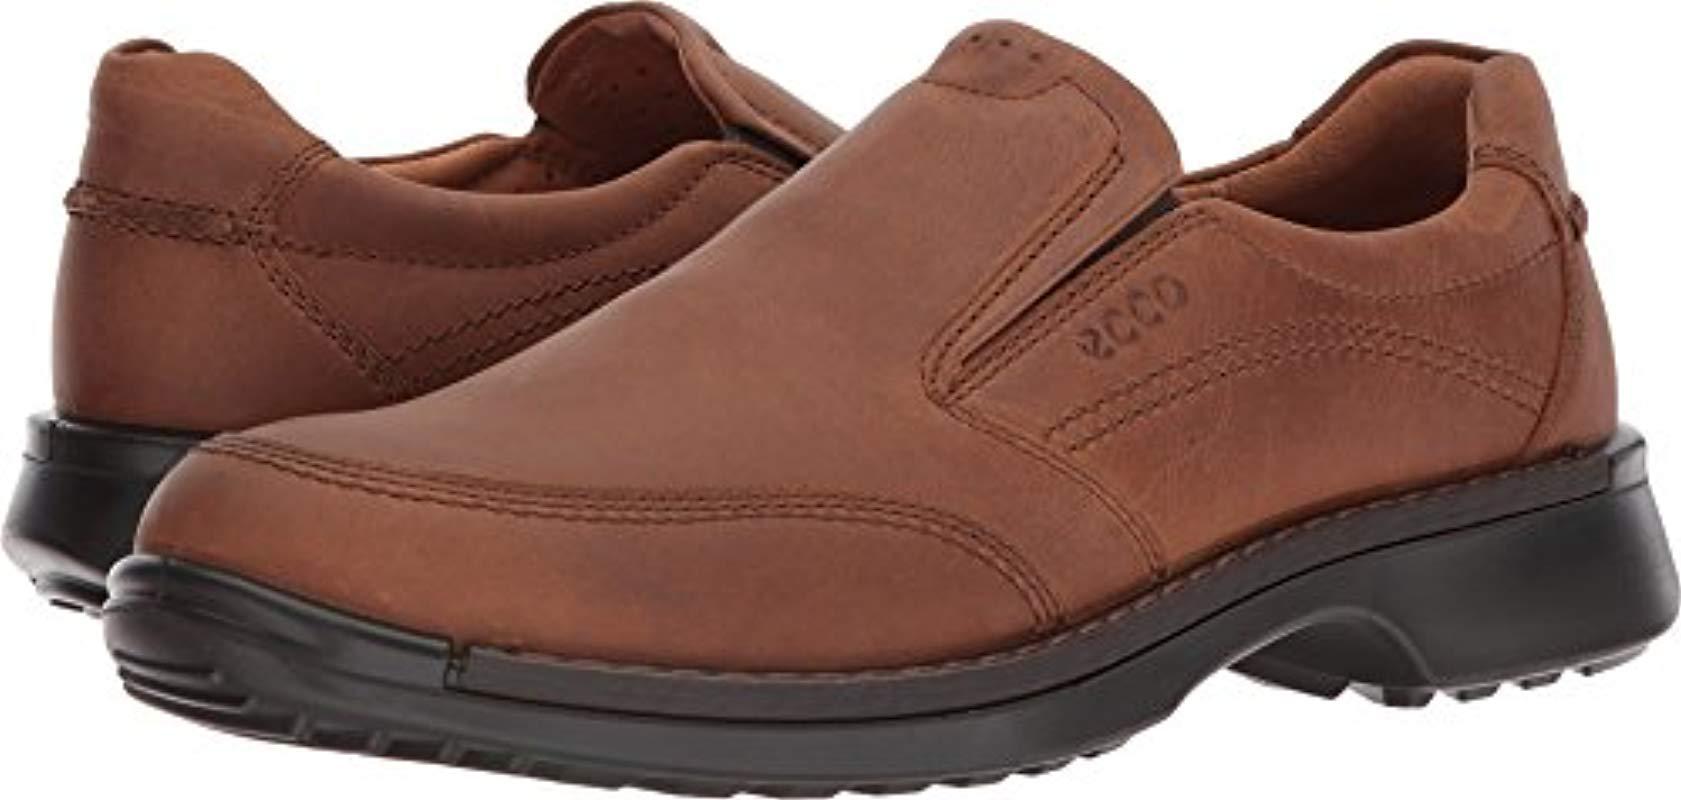 Ecco Leather Fusion Ii Slip On Slip-on Loafer in Amber (Brown) for Men -  Lyst